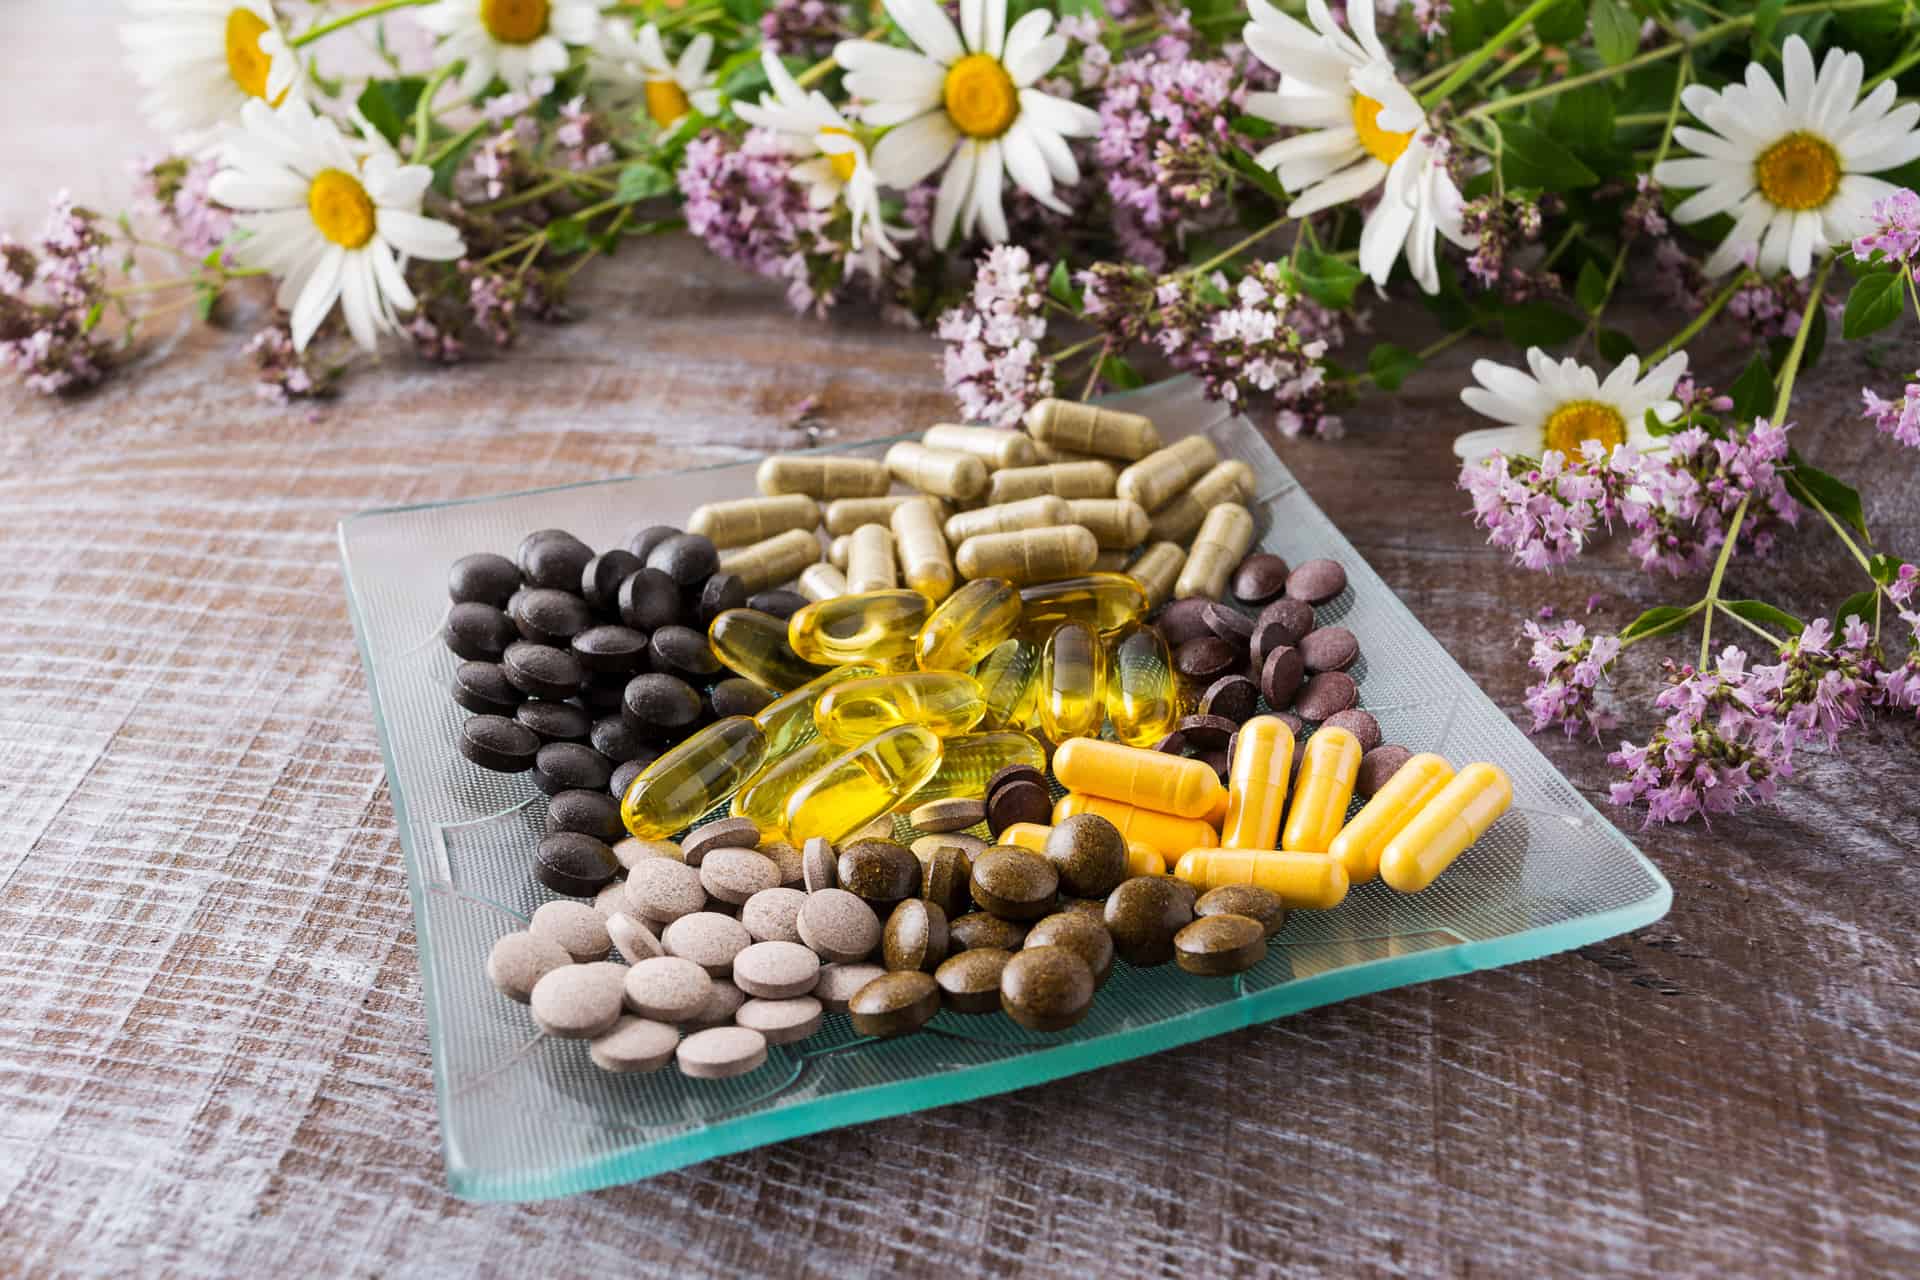 When It Comes to Dietary Supplements, Natural Retailers Have the Advantage  | WholeFoods Magazine